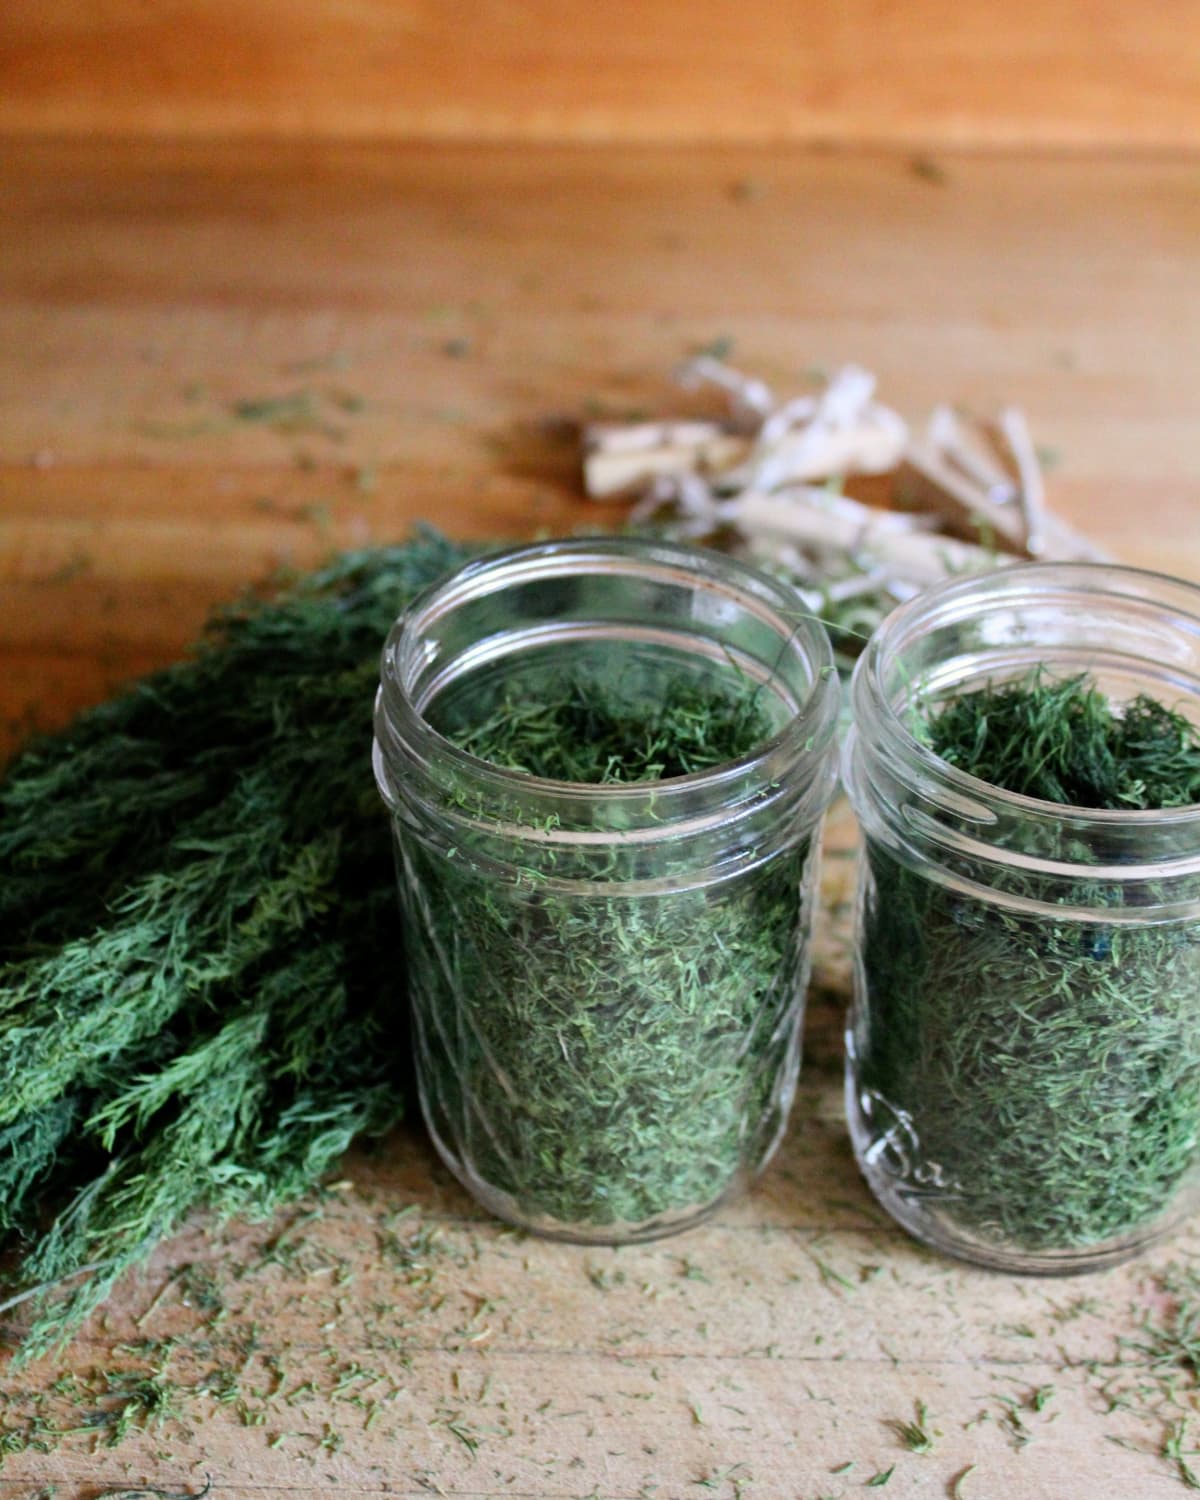 Dill stalks on a table and in glass jars. 